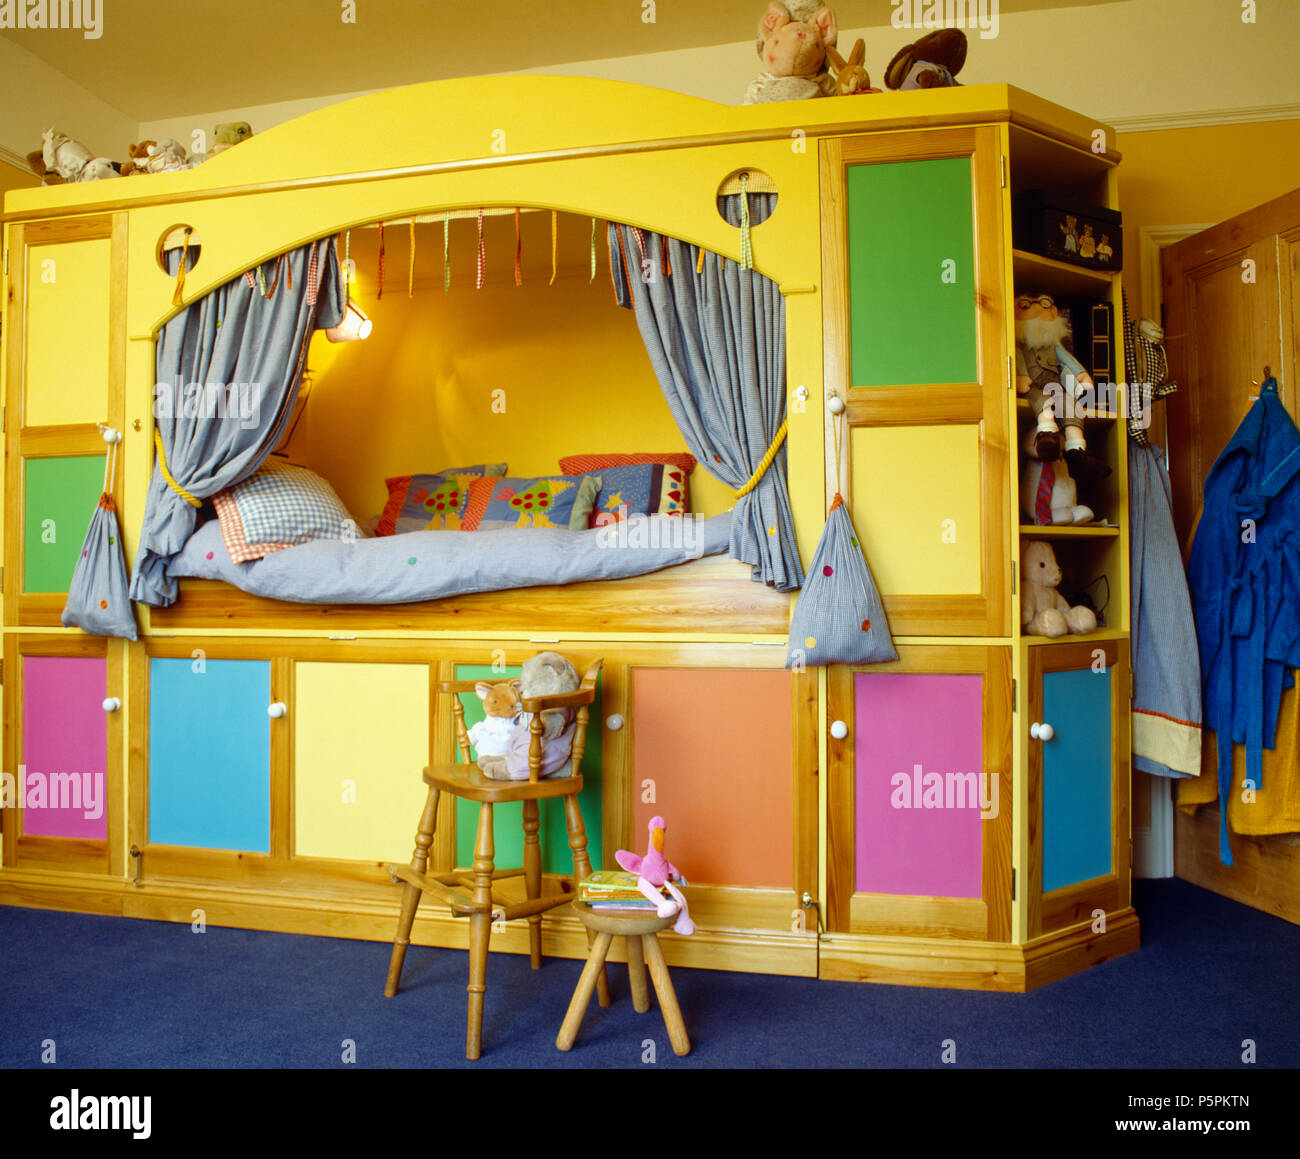 Yellow built-in platform bed with colourful doors on under-bed storage in child's bedroom Stock Photo